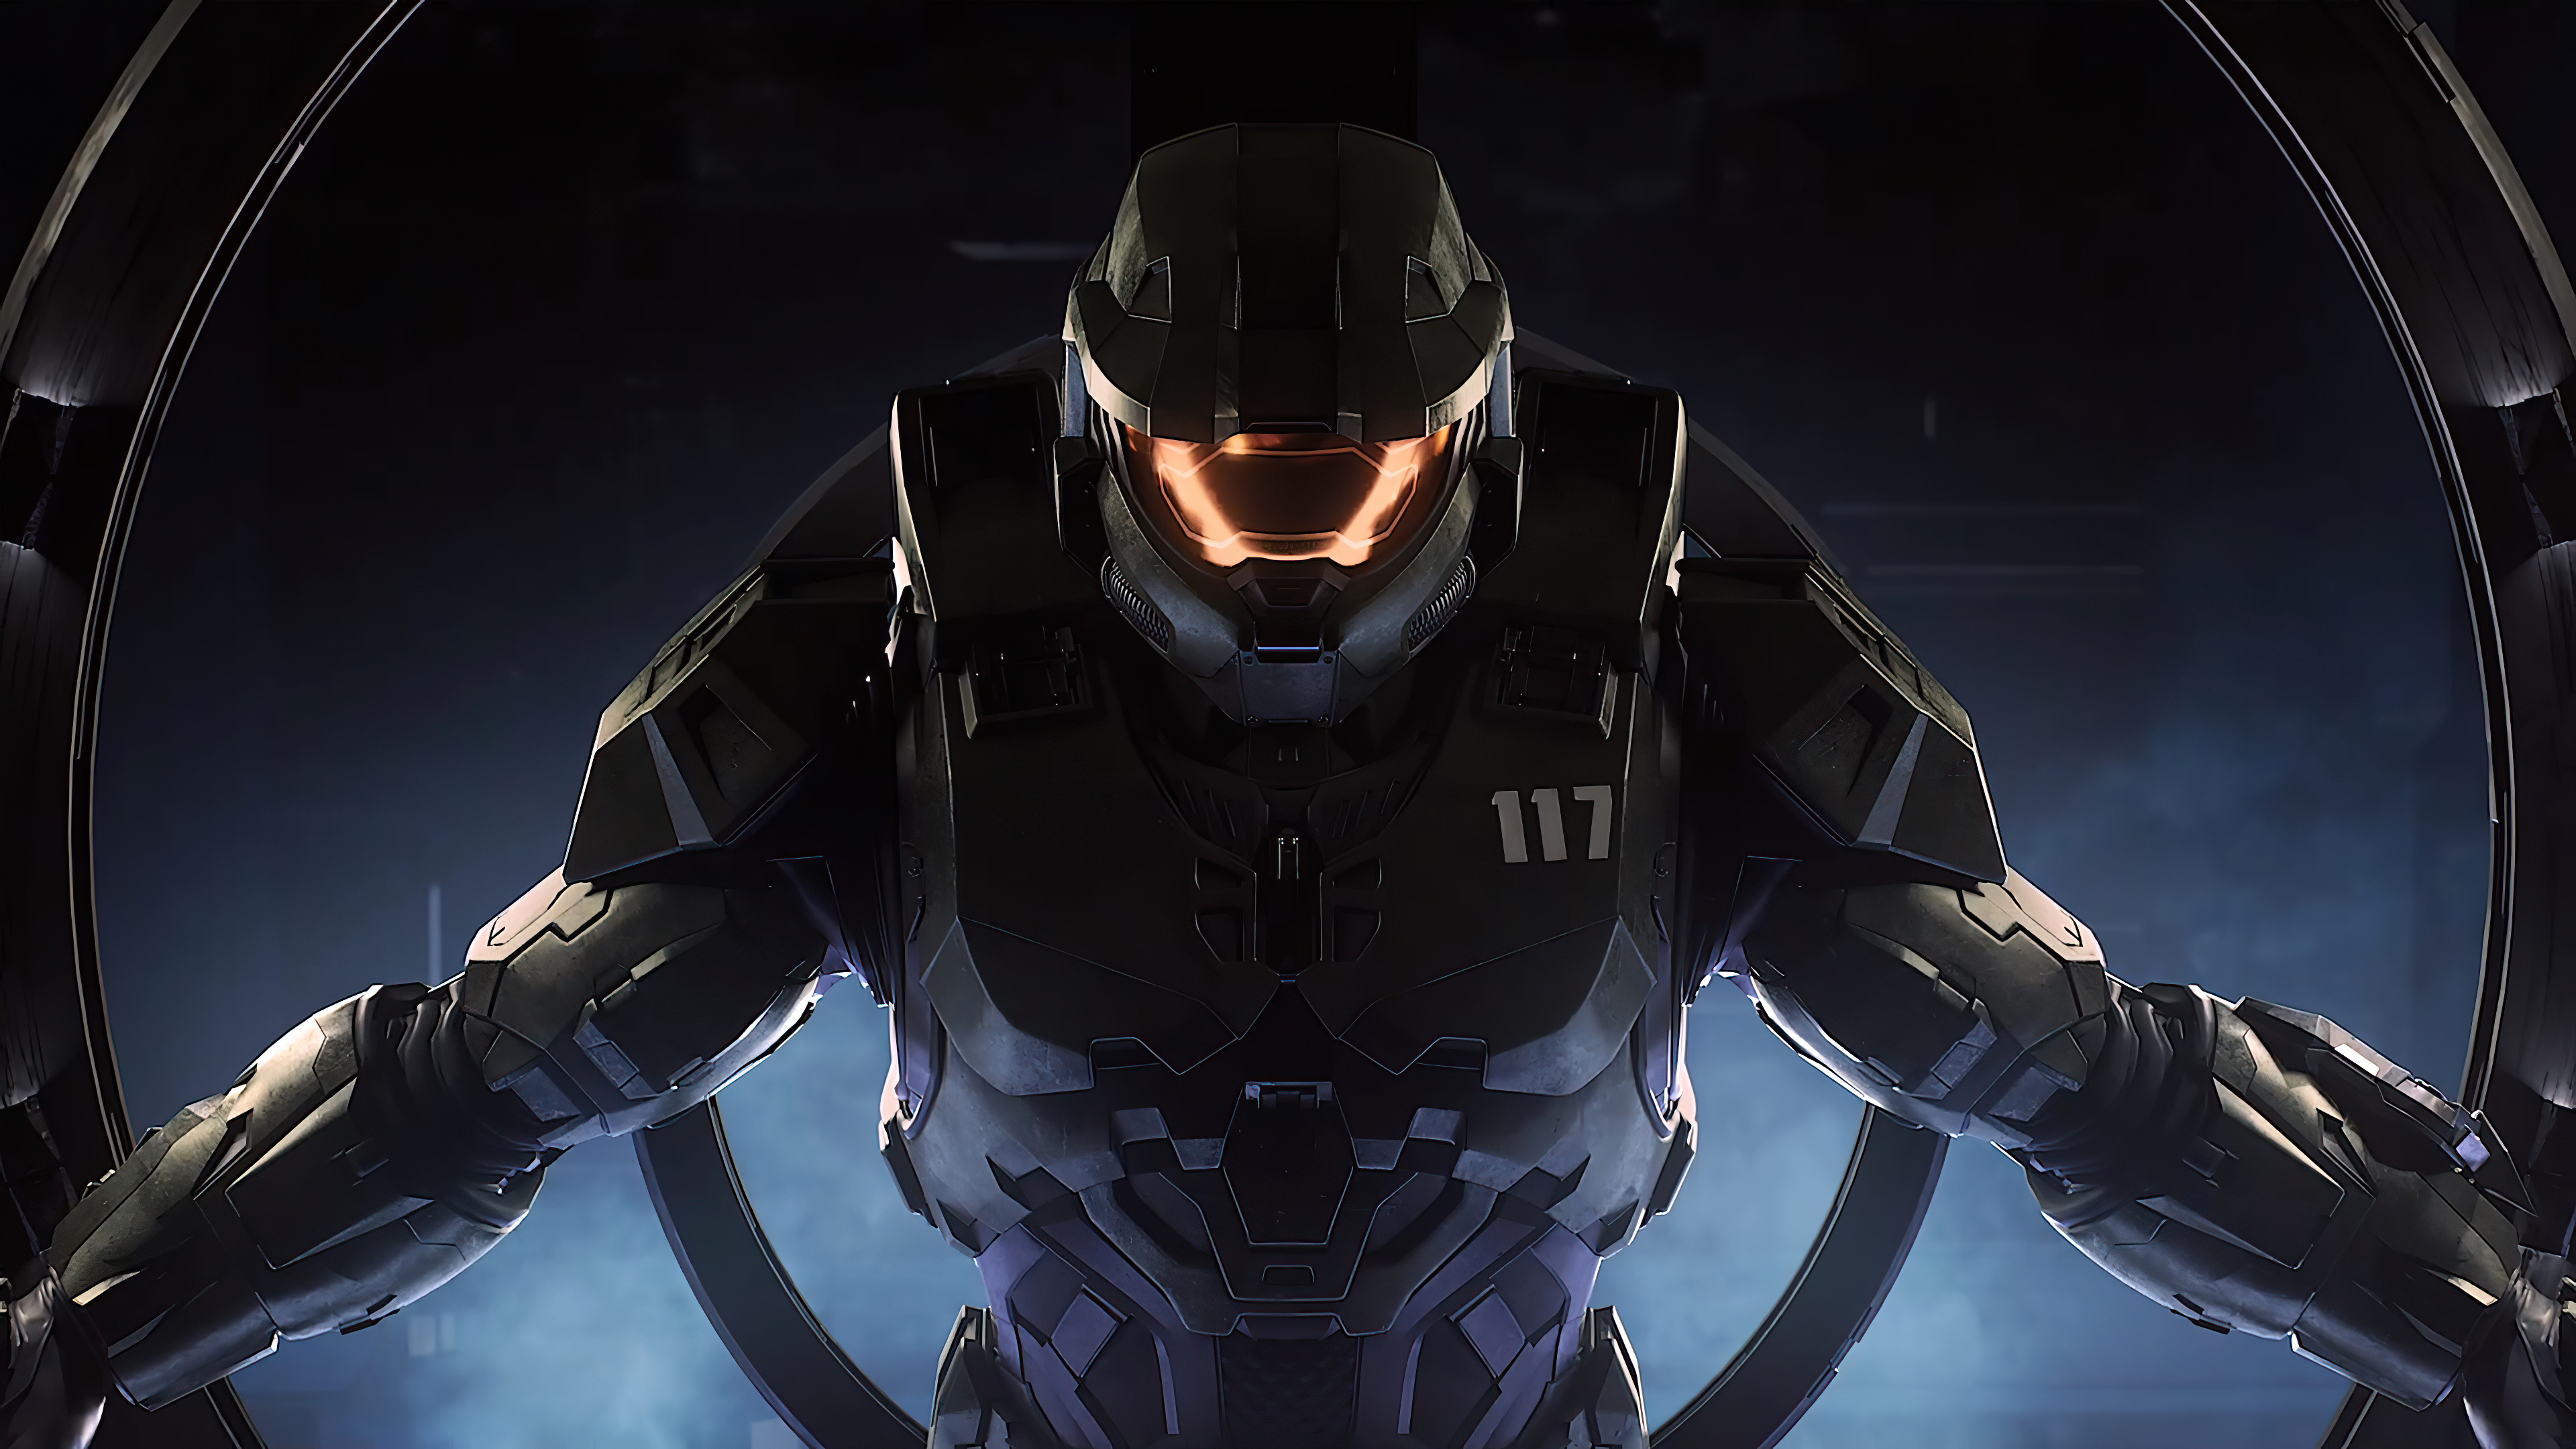 Cool Halo Infinite 2020 Wallpapers